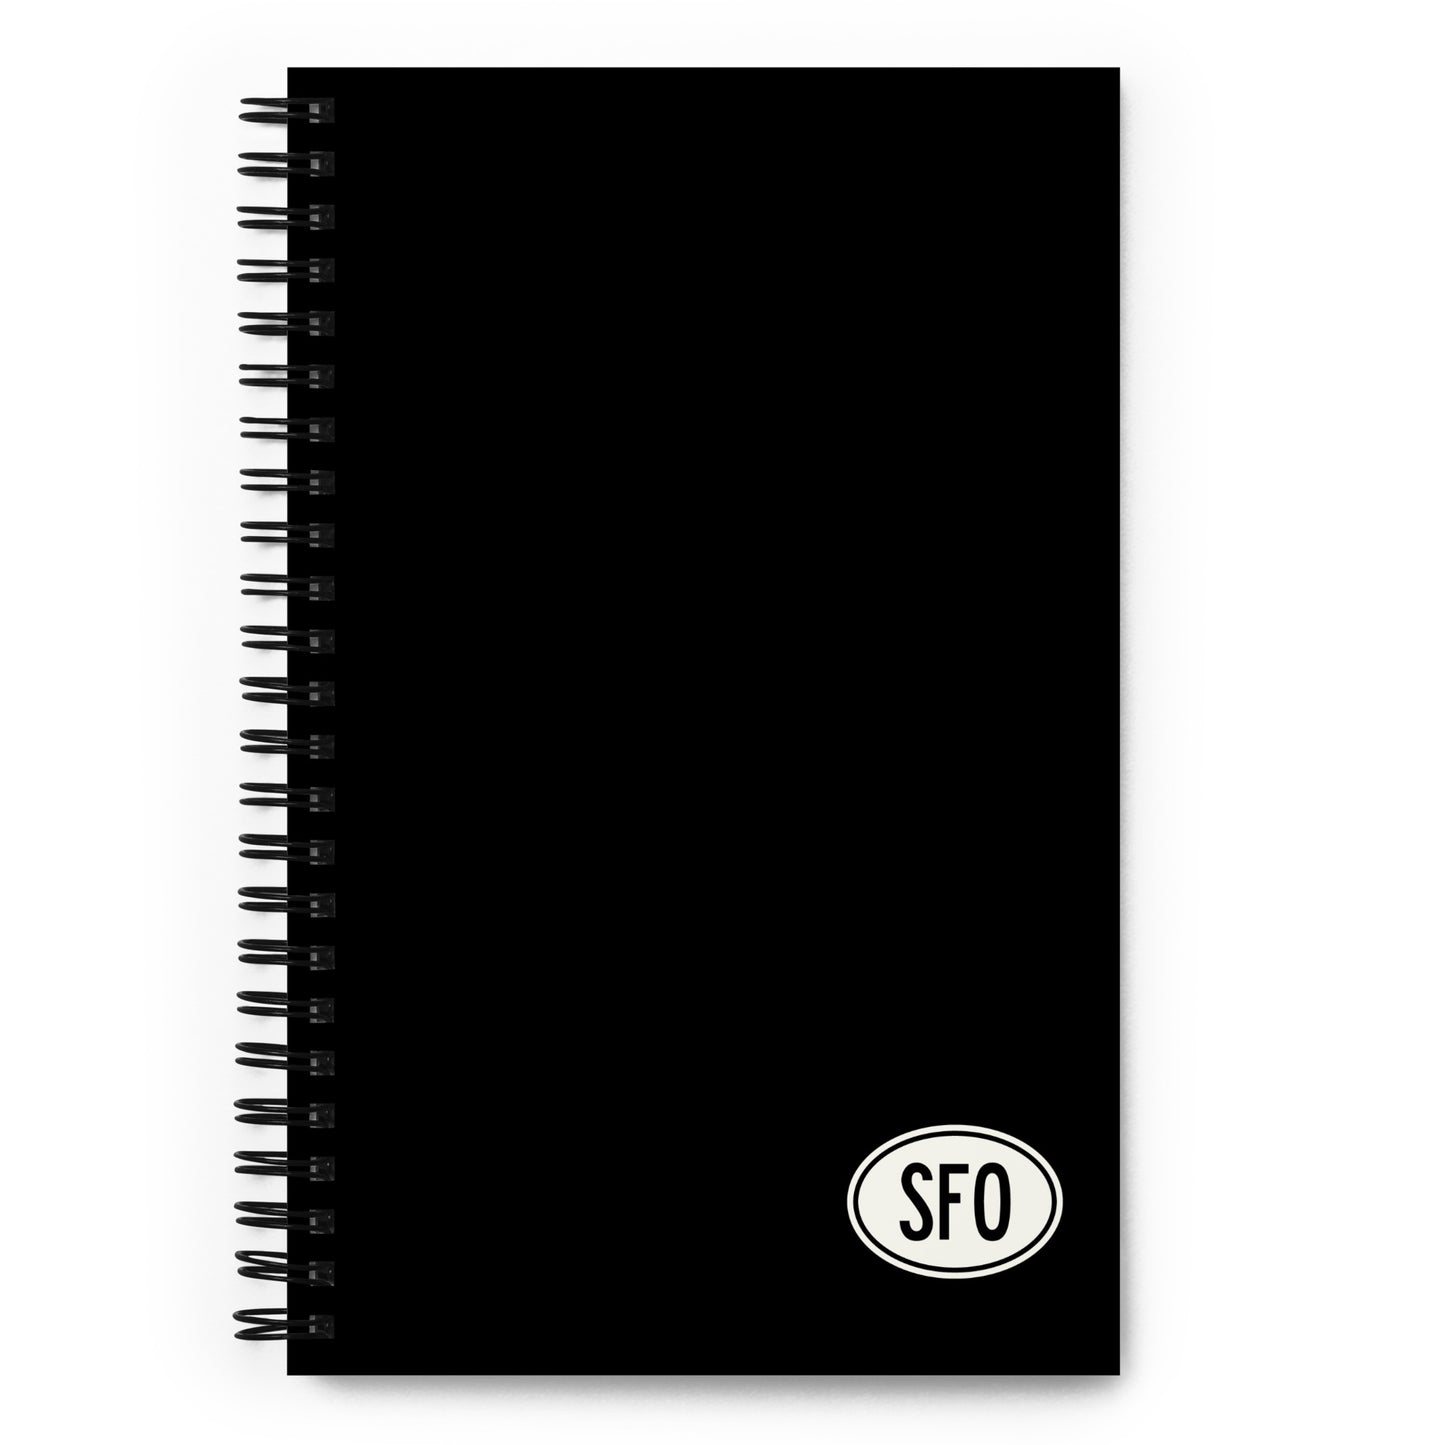 Unique Travel Gift Spiral Notebook - White Oval • SFO San Francisco • YHM Designs - Image 01